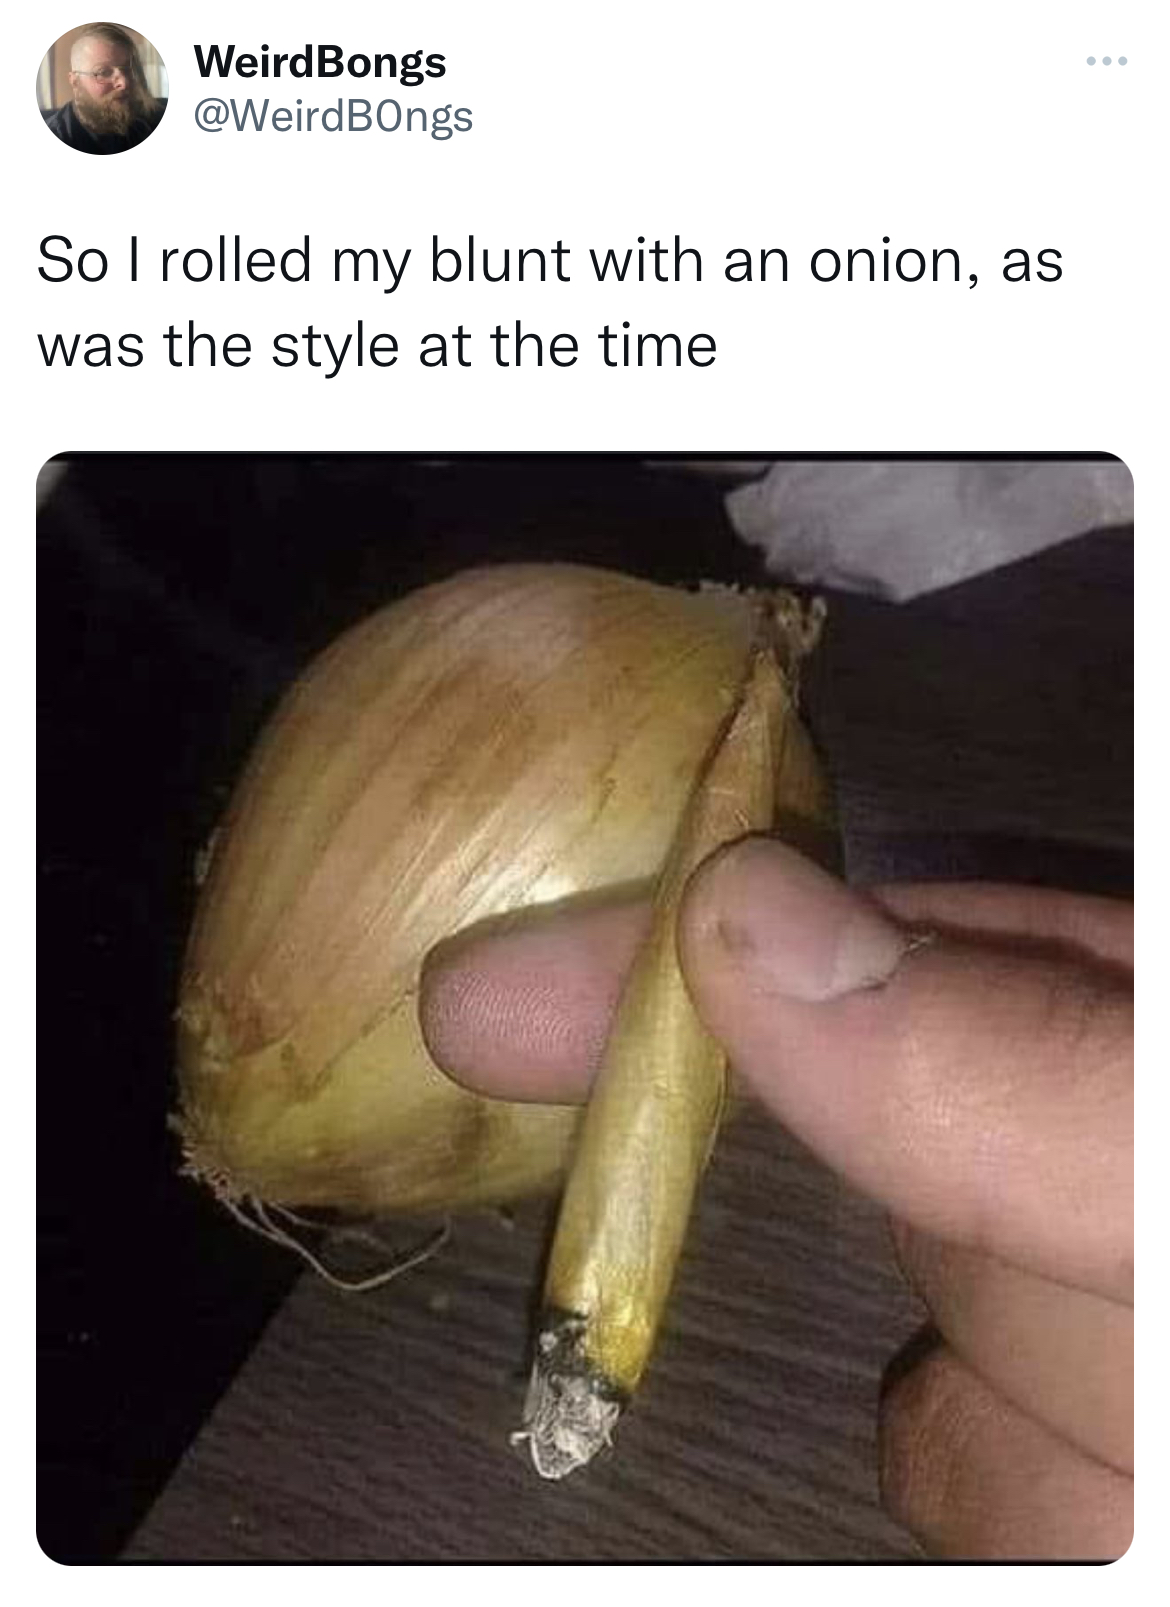 deranged tweets - onion memes - WeirdBongs So I rolled my blunt with an onion, as was the style at the time